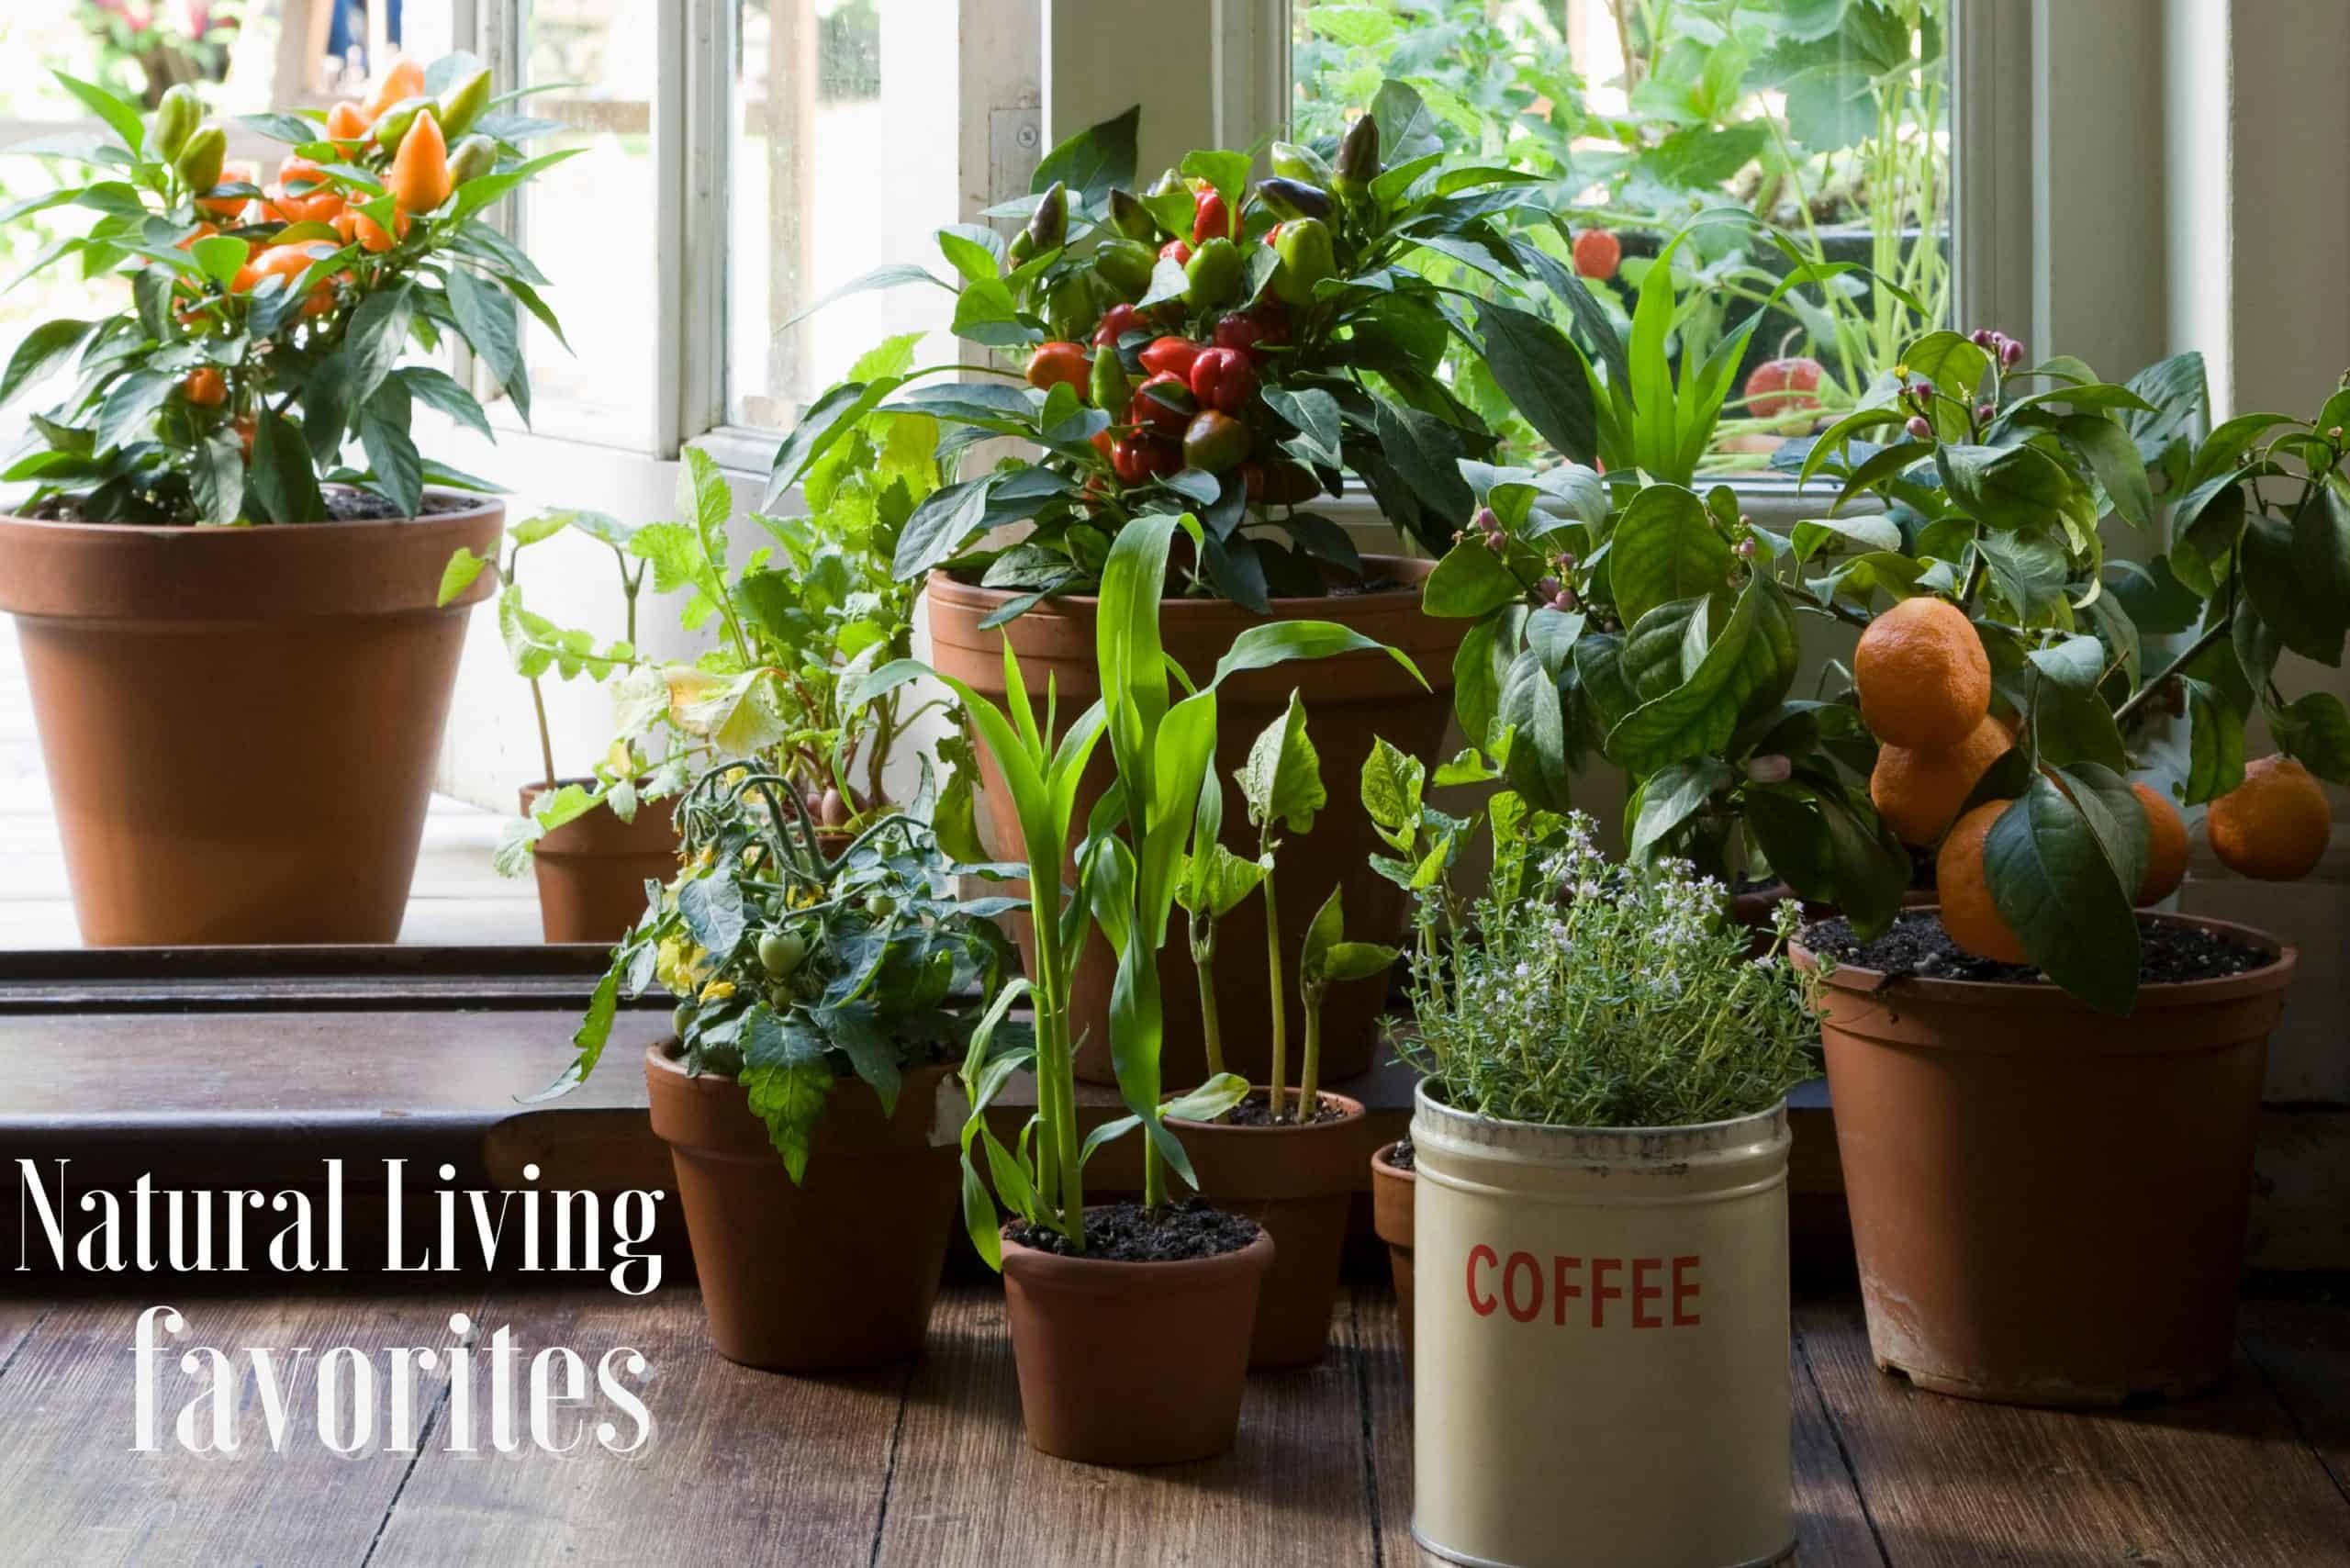 Potted plants on a wood floor